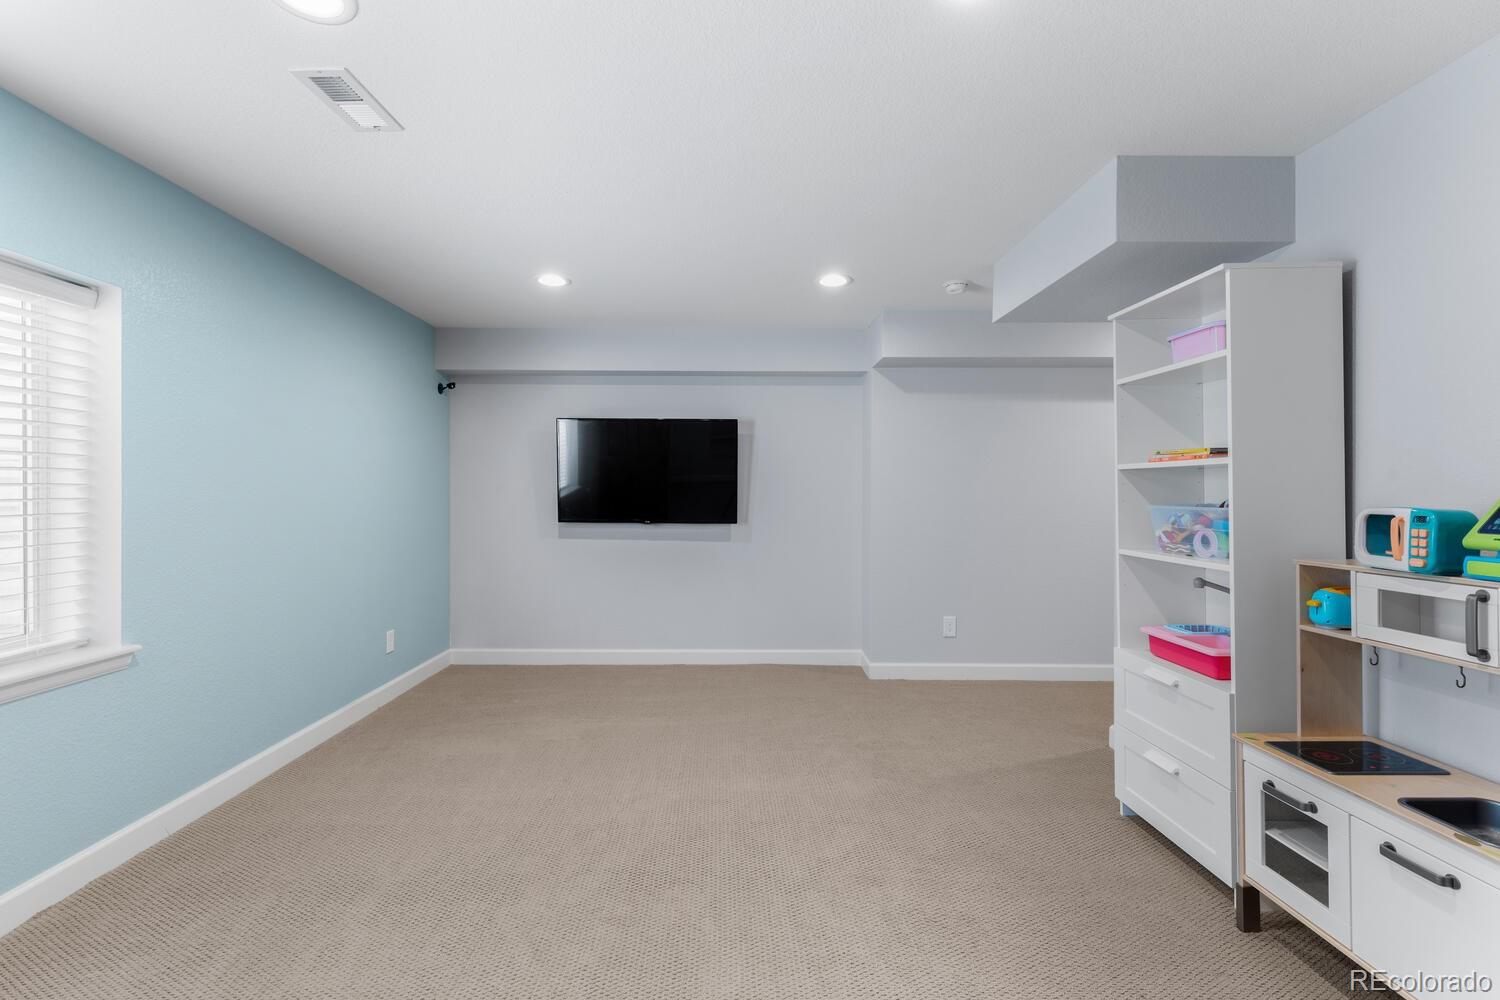 Basement game or media room with an egress window